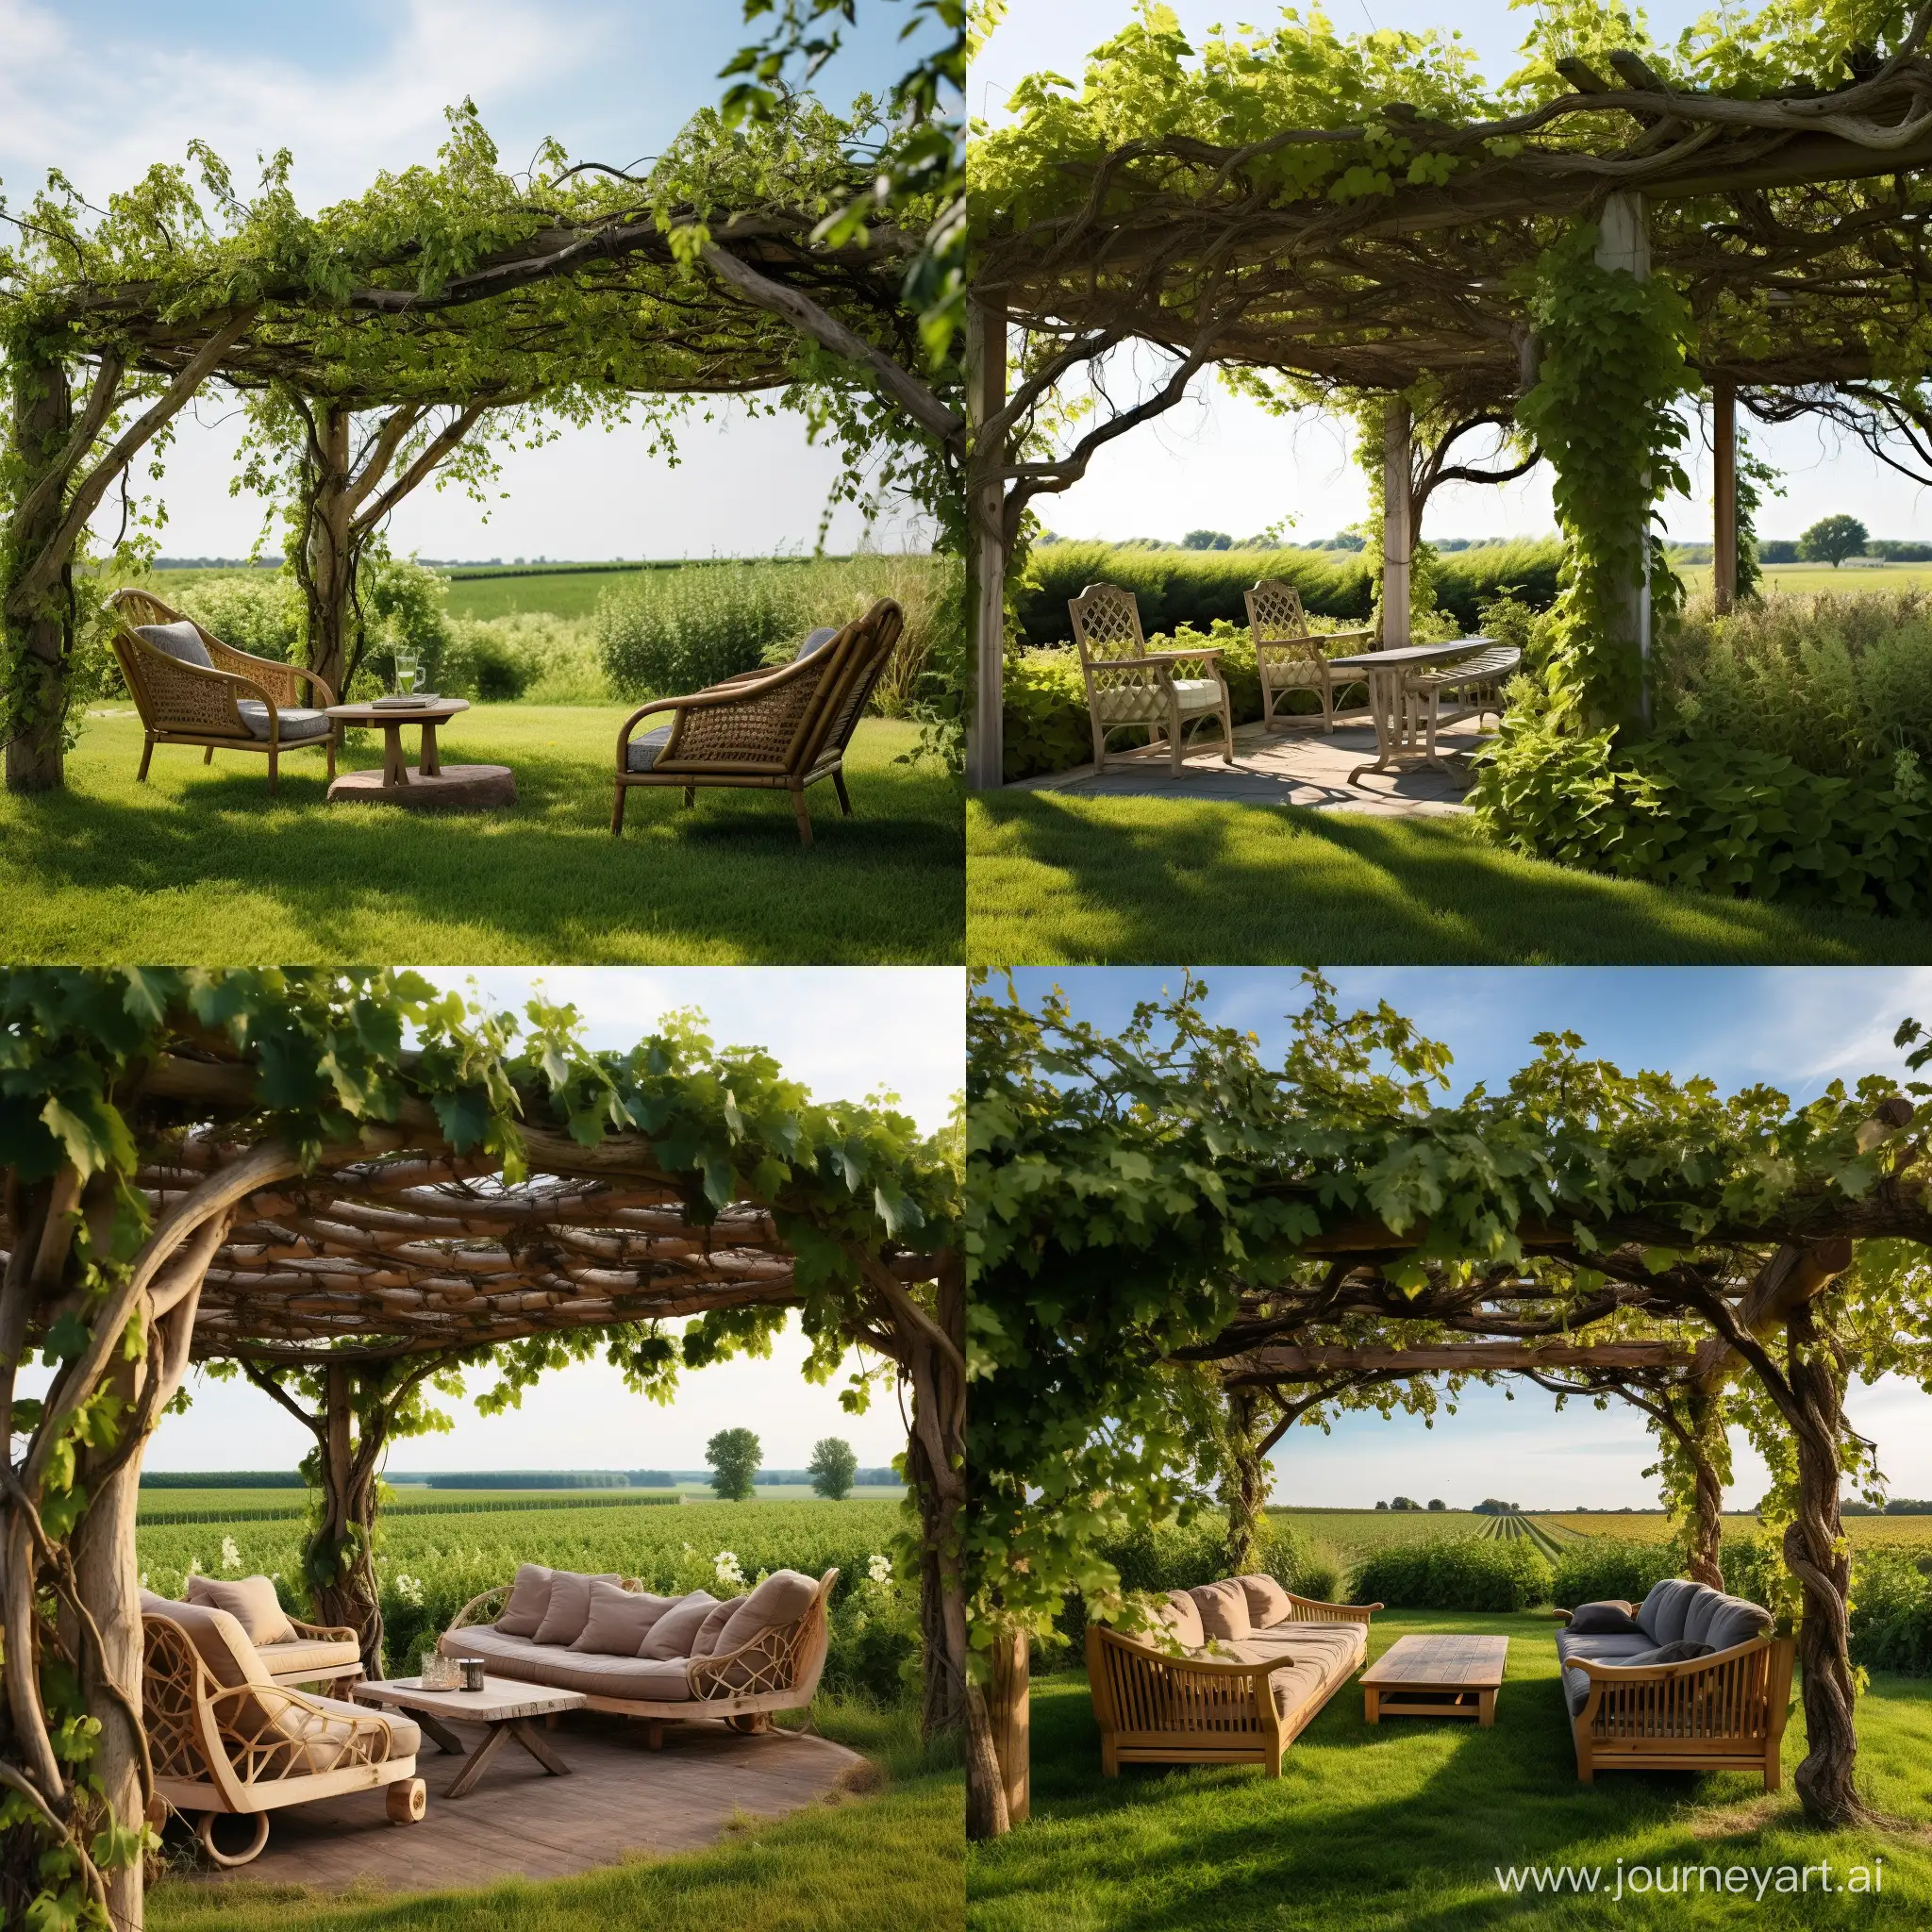 Enchanting-Pergola-Seating-Area-Covered-in-Vines-on-a-Grassy-Field